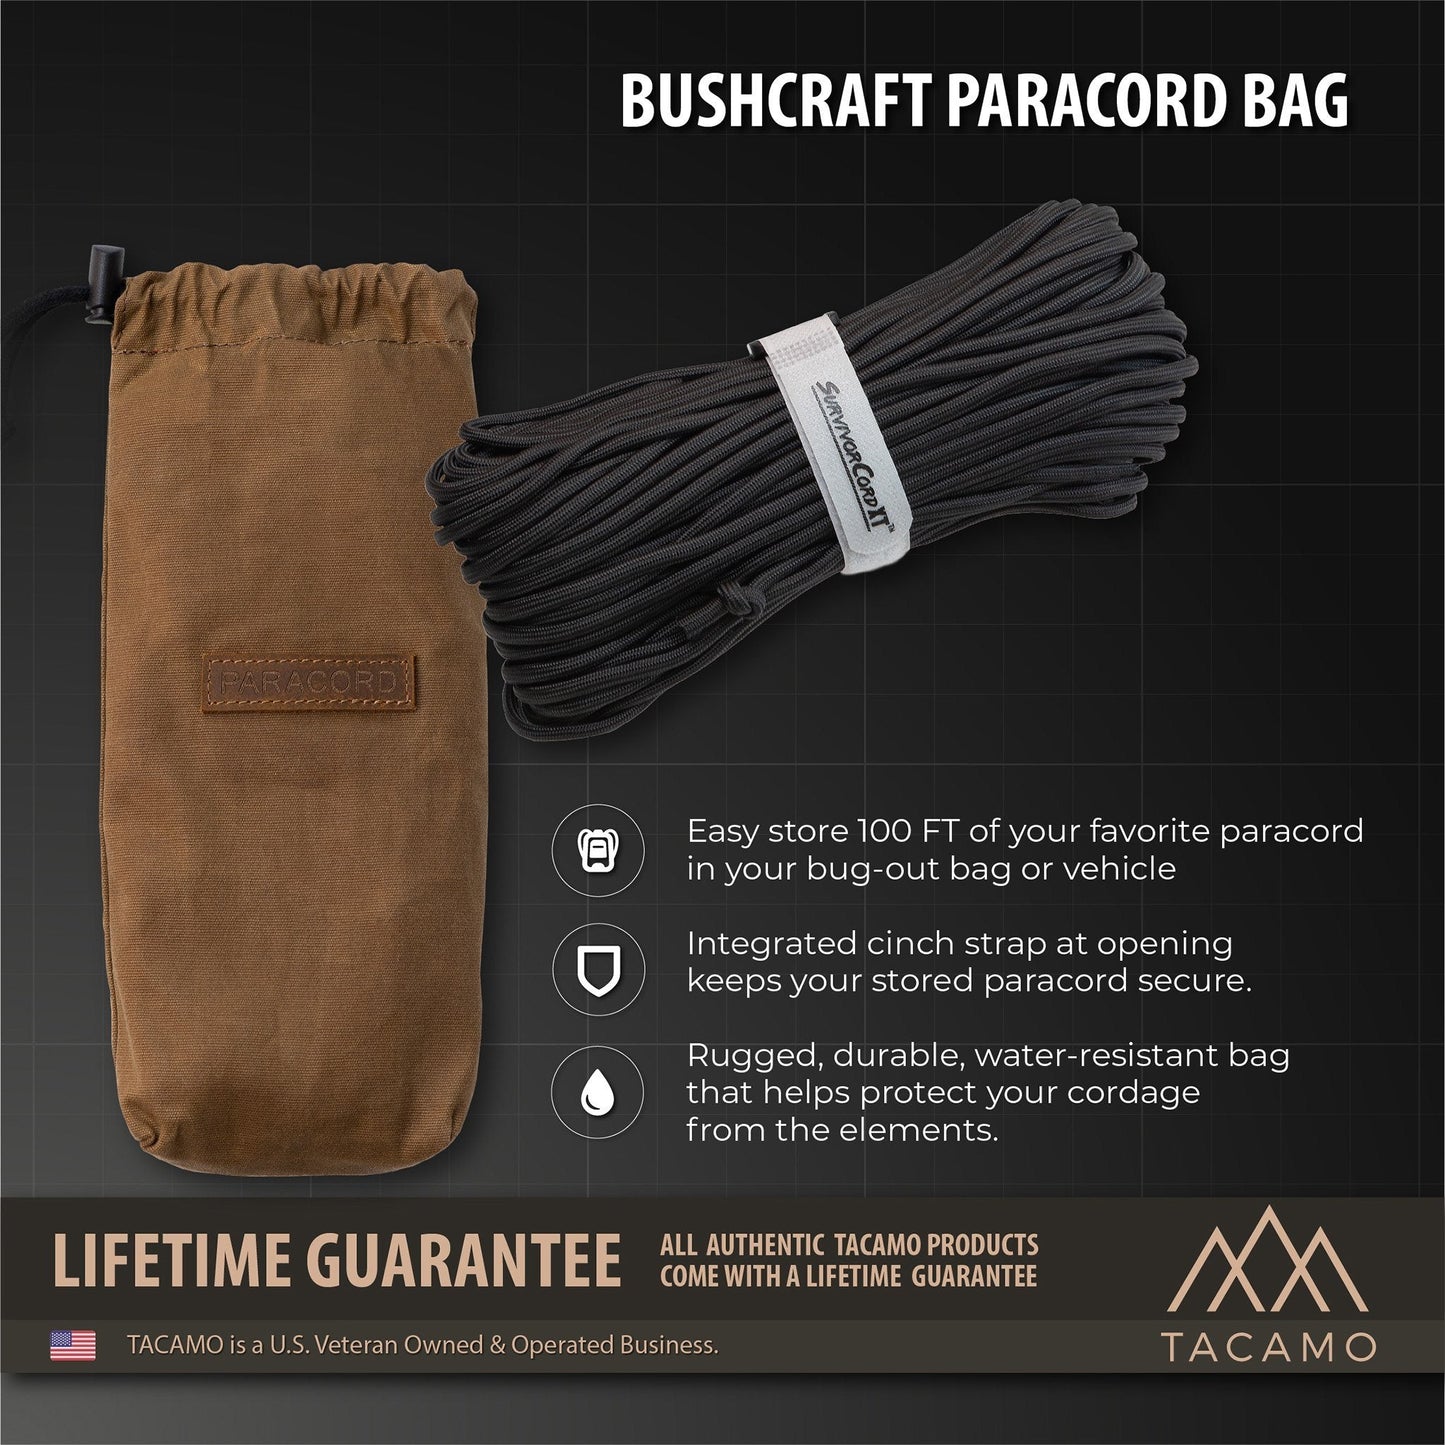 Display of Canvas Bushcraft Bag and paracord showcasing product description and range of use